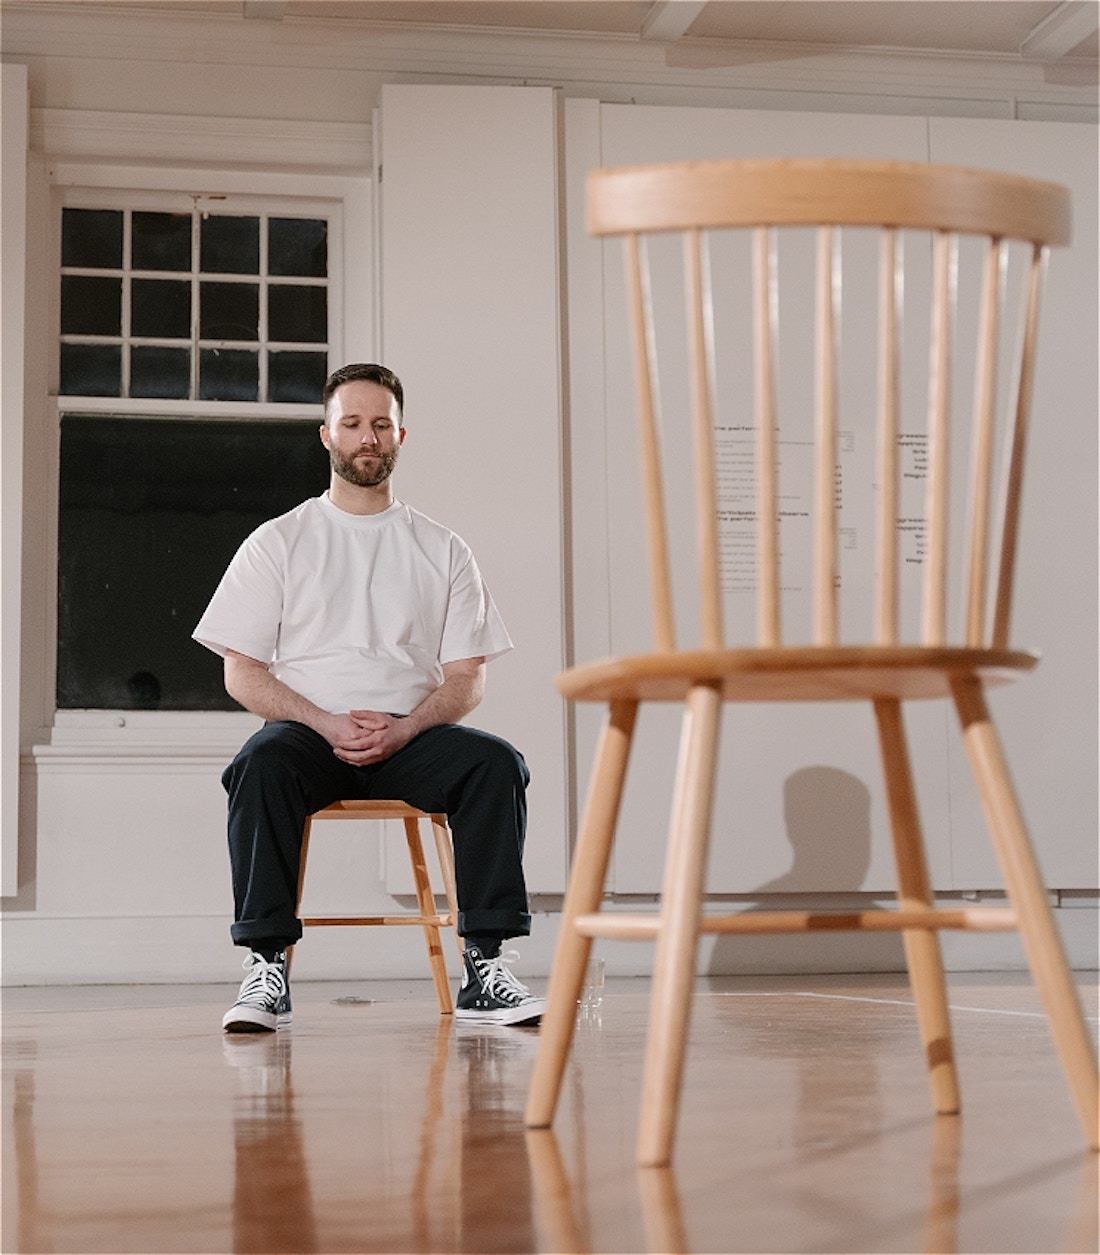 Man with a white t-shirt, navy pants, and Chuck Taylor shoes sits on a wooden chair. Opposite him is an empty chair, and behind him is a darkened window. This is in a gallery with wooden floors and white walls.